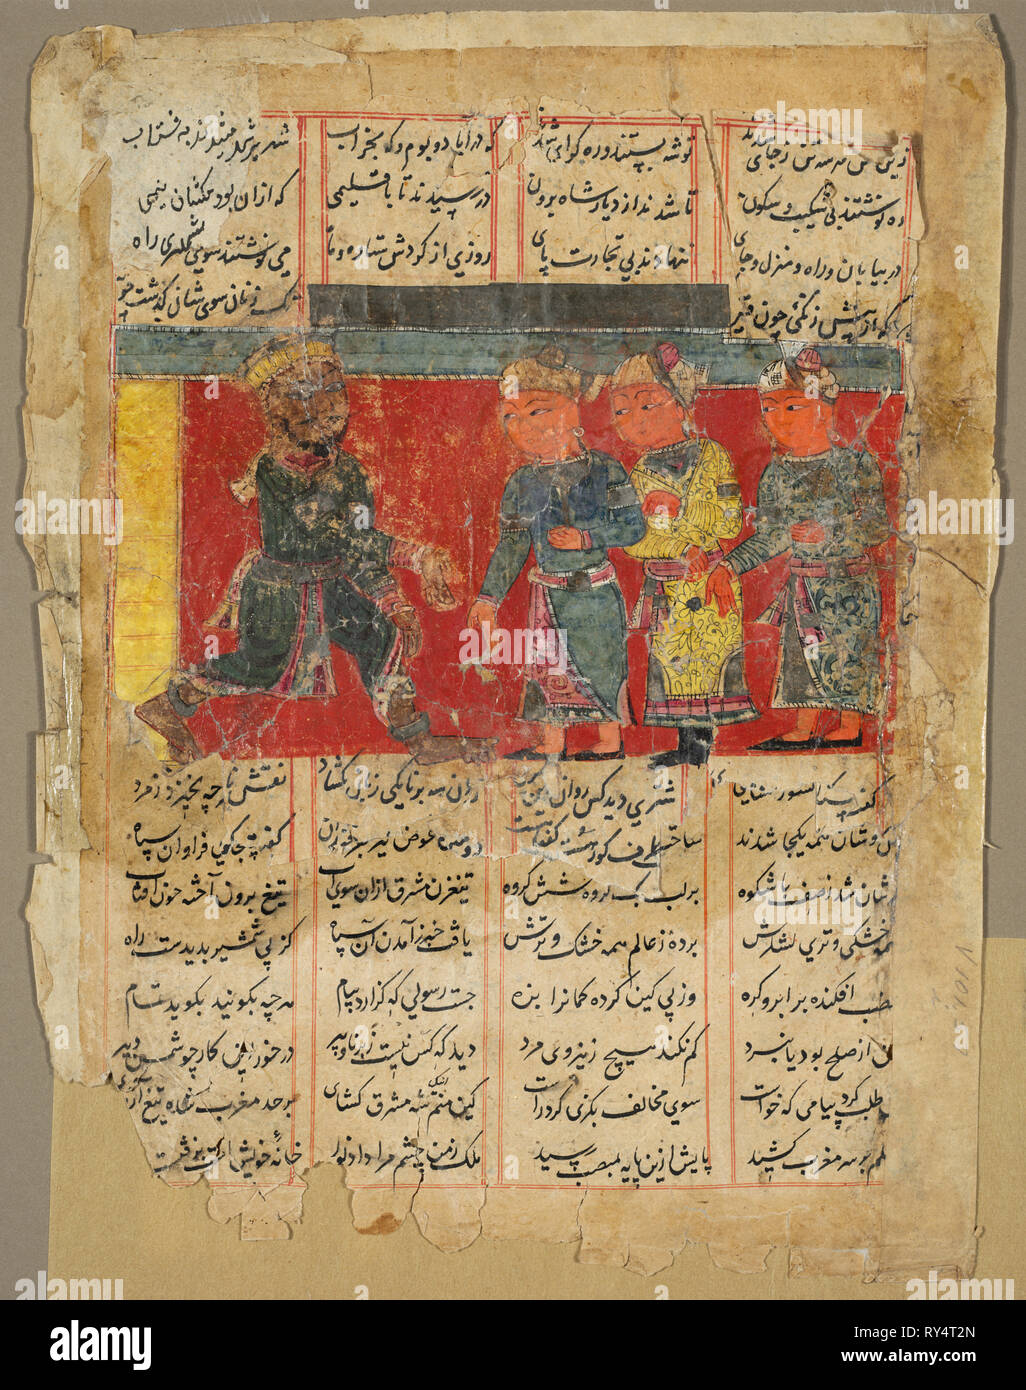 A King Receiving Three Men, page from the Khamsa of Amir Khusrau Dihlavi, 1450-1500. India, Sultanate school, second half of 15th century. Ink and color on paper; overall: 28.6 x 21.6 cm (11 1/4 x 8 1/2 in Stock Photo